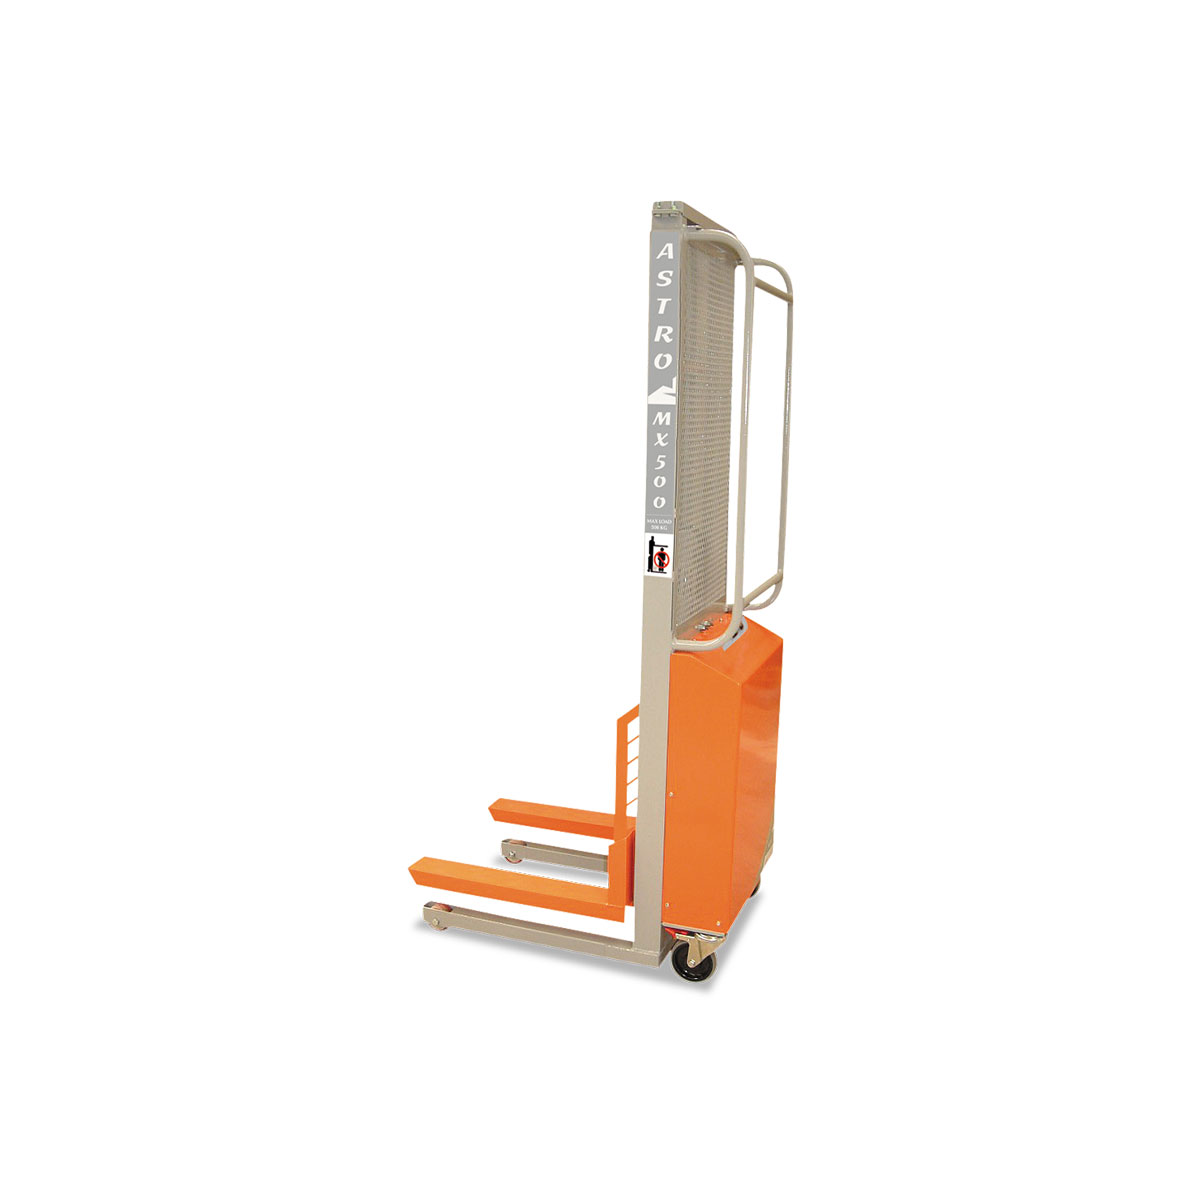 Buy Semi-electric Pallet Stacker (Compact) in Pallet Stackers from Astrolift NZ